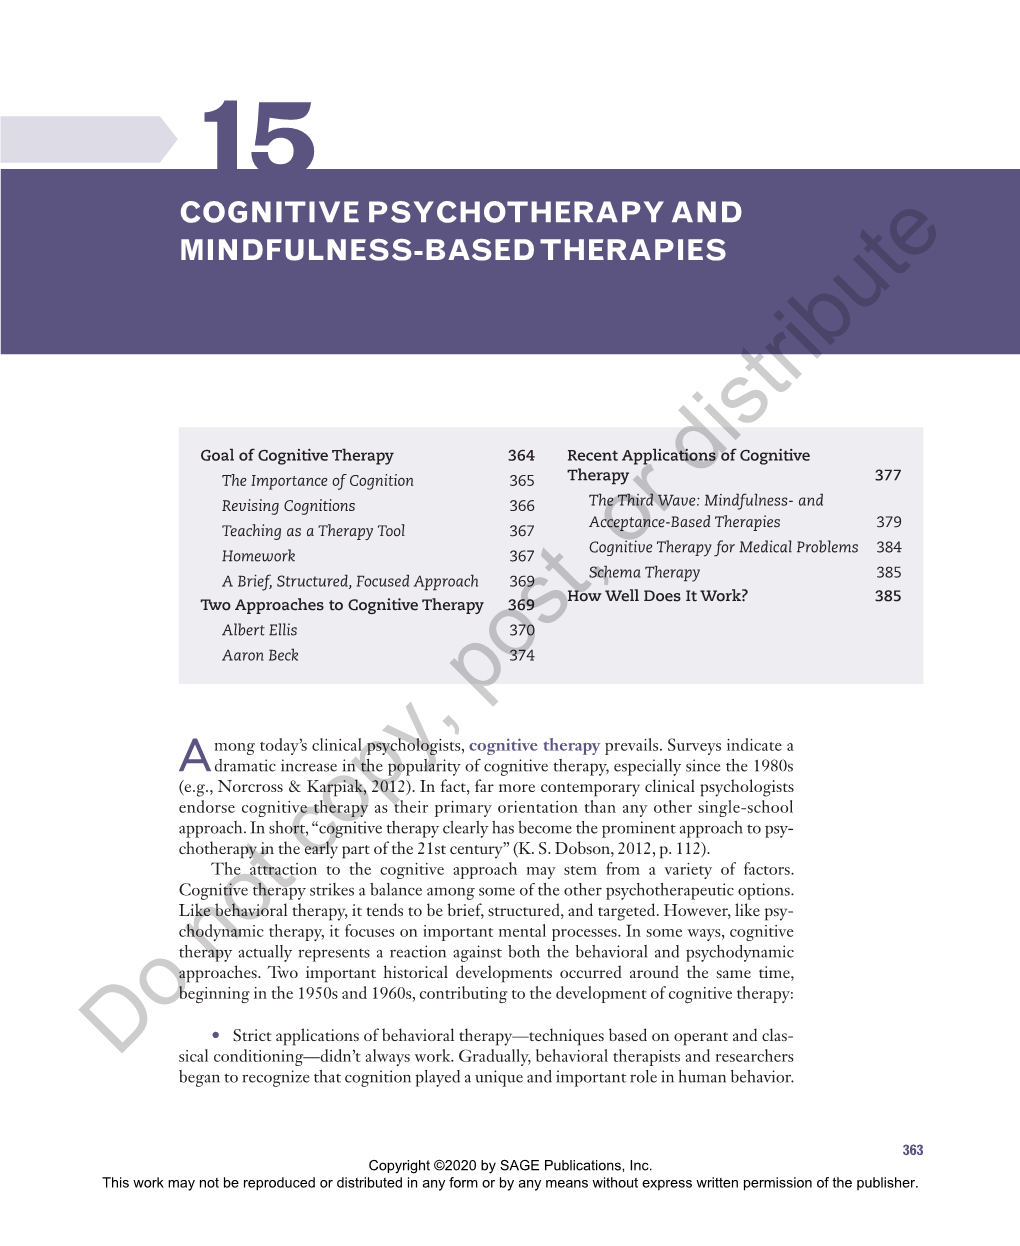 Cognitive Psychotherapy and Mindfulness-Based Therapies